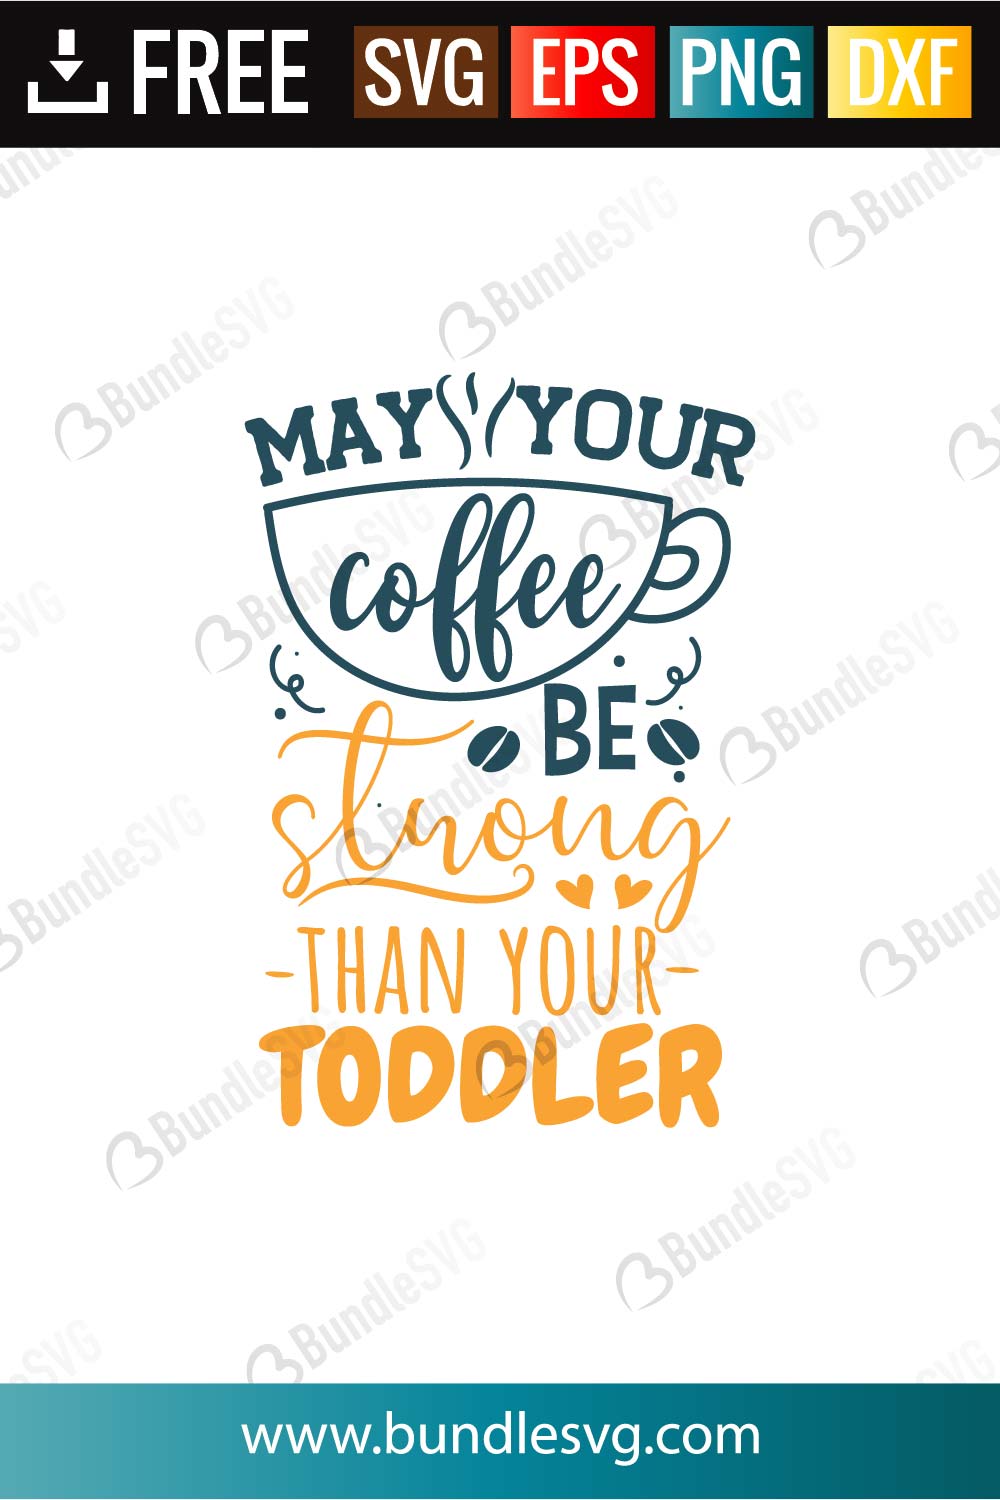 Download May Your Coffee Be Strong Than Your Toddler Svg Cut Files Bundlesvg